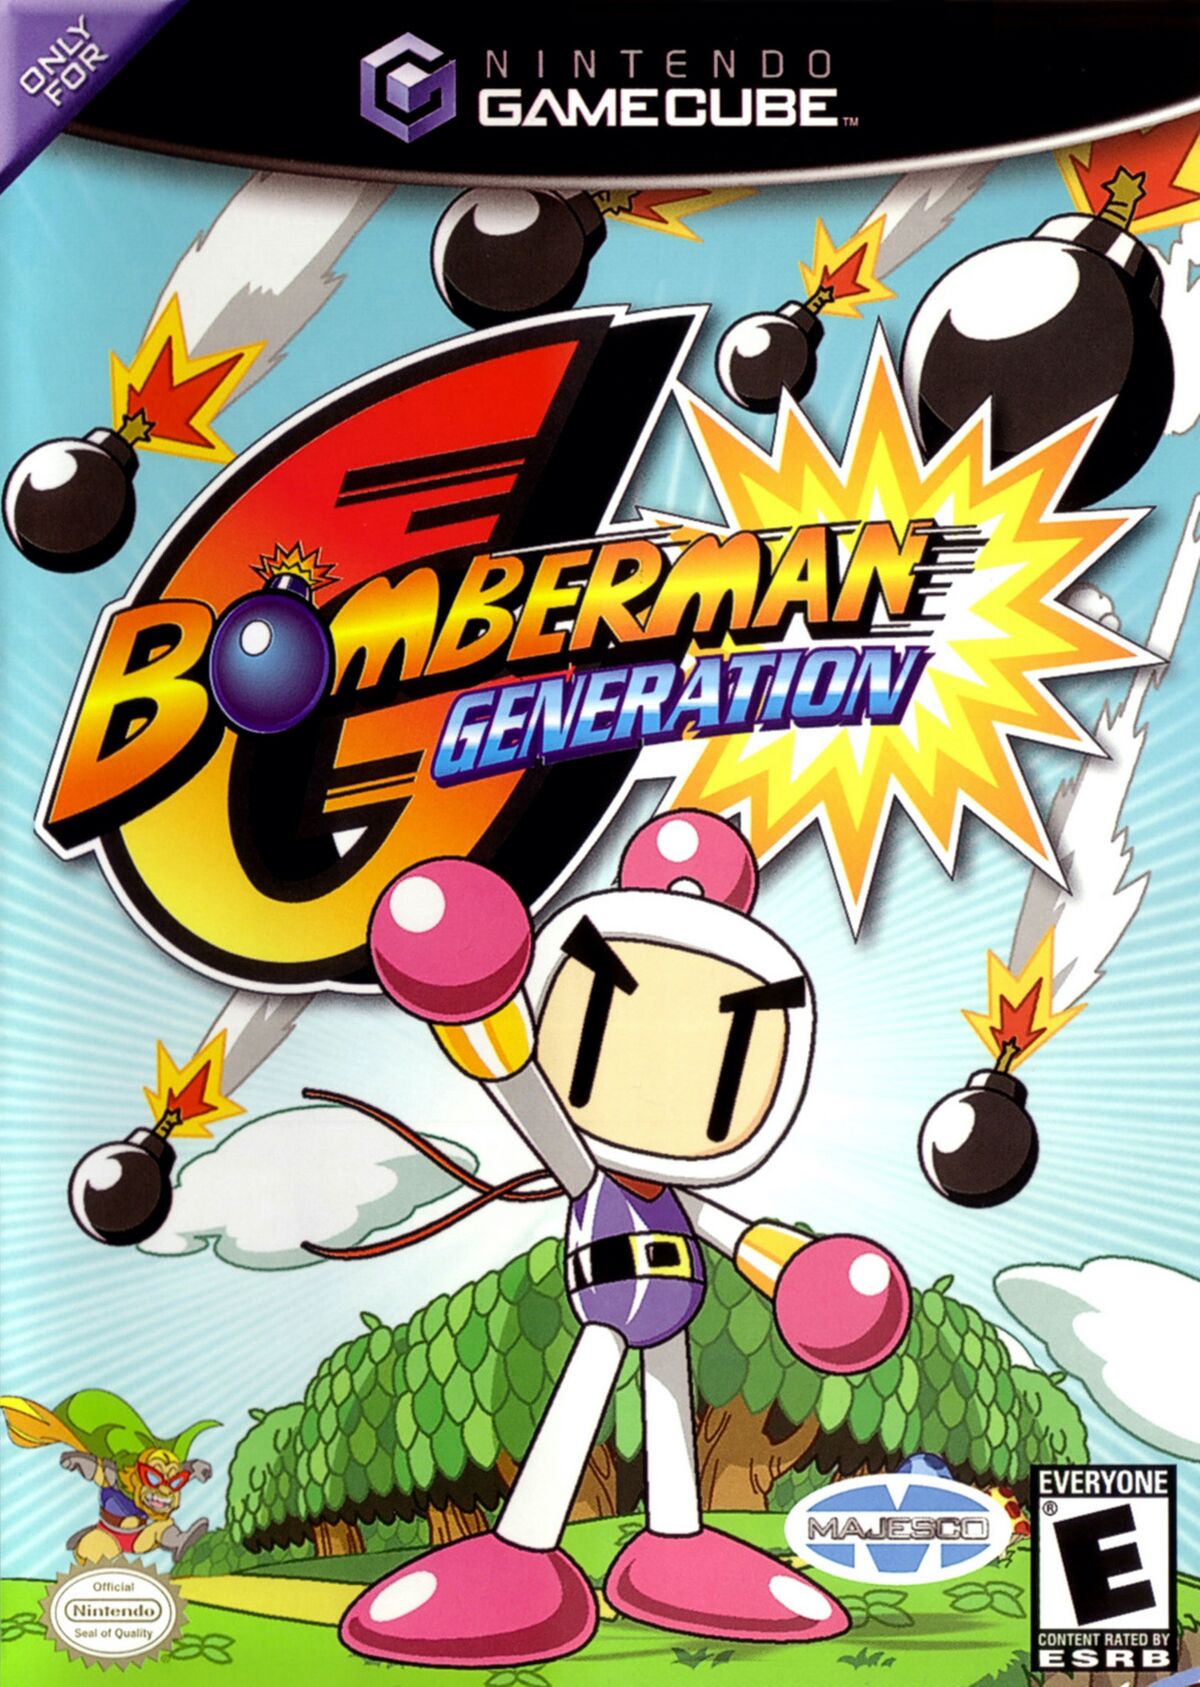 bomberman-generation-strategywiki-strategy-guide-and-game-reference-wiki